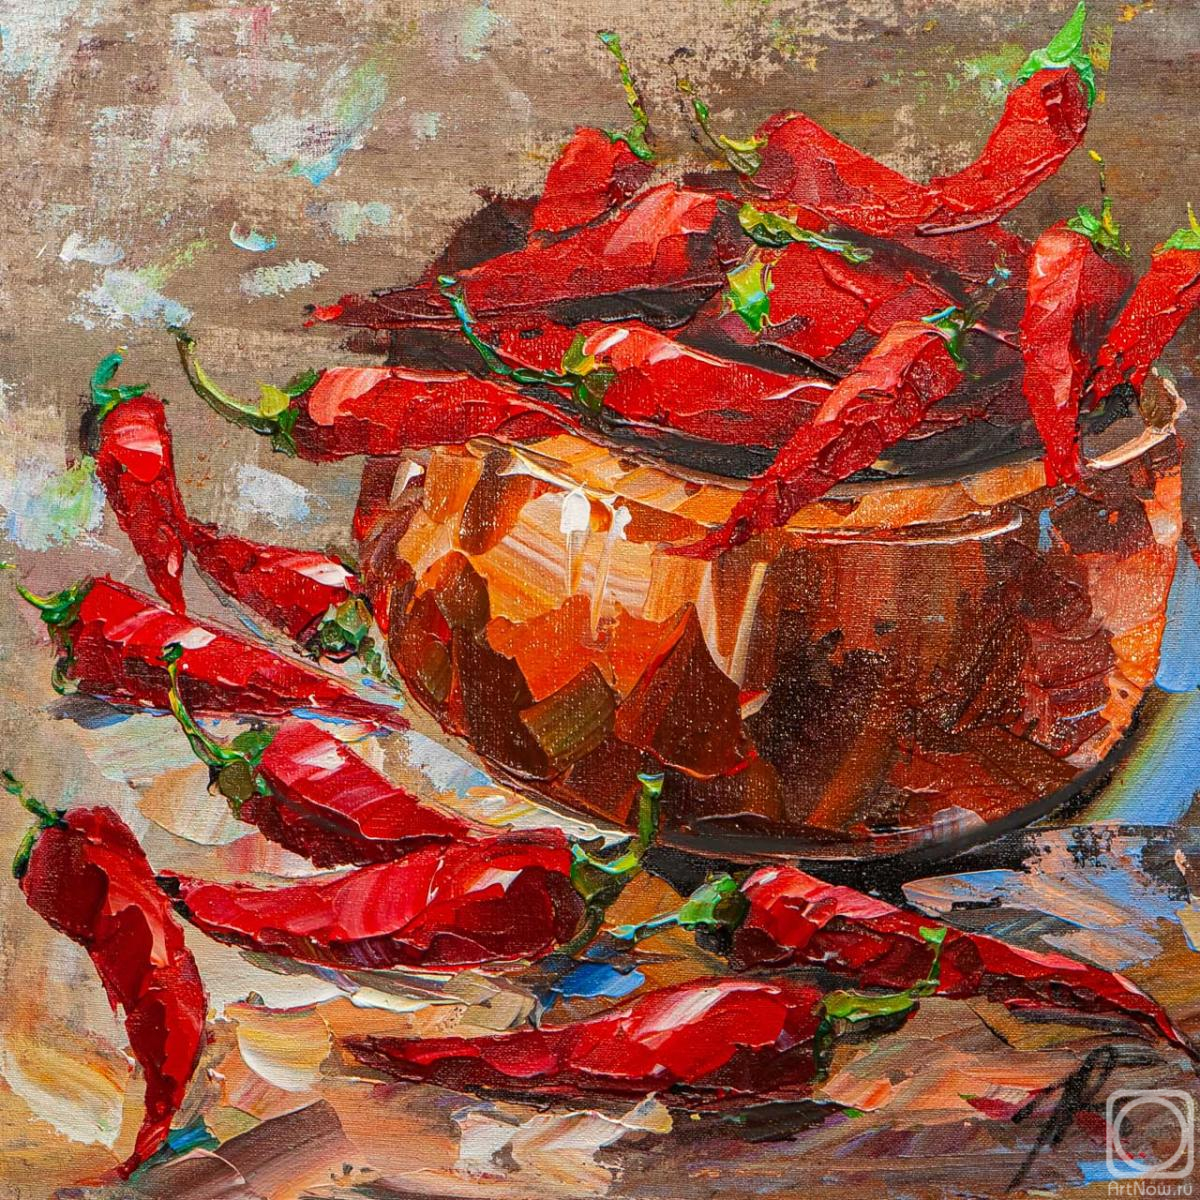 Rodries Jose. Still life with red pepper